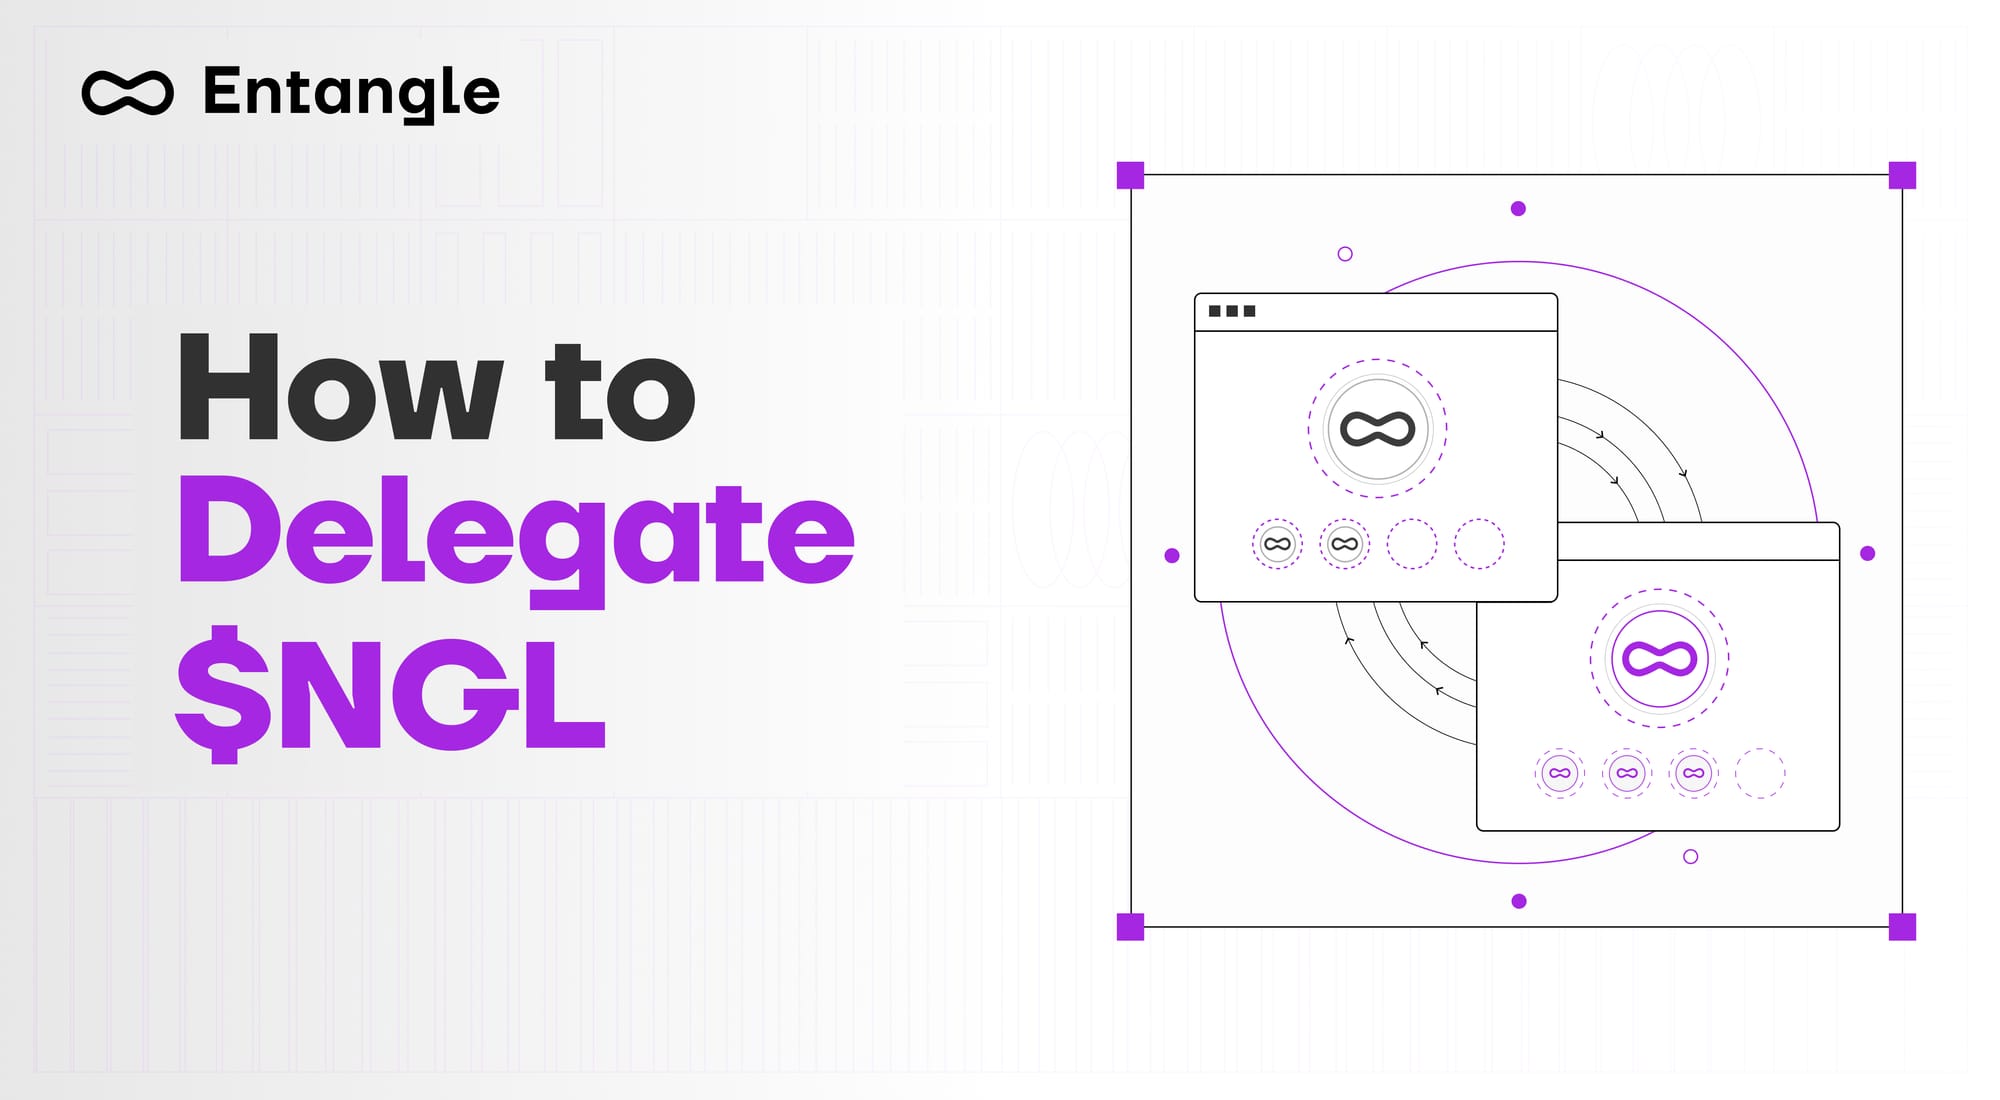 How to Delegate $NGL